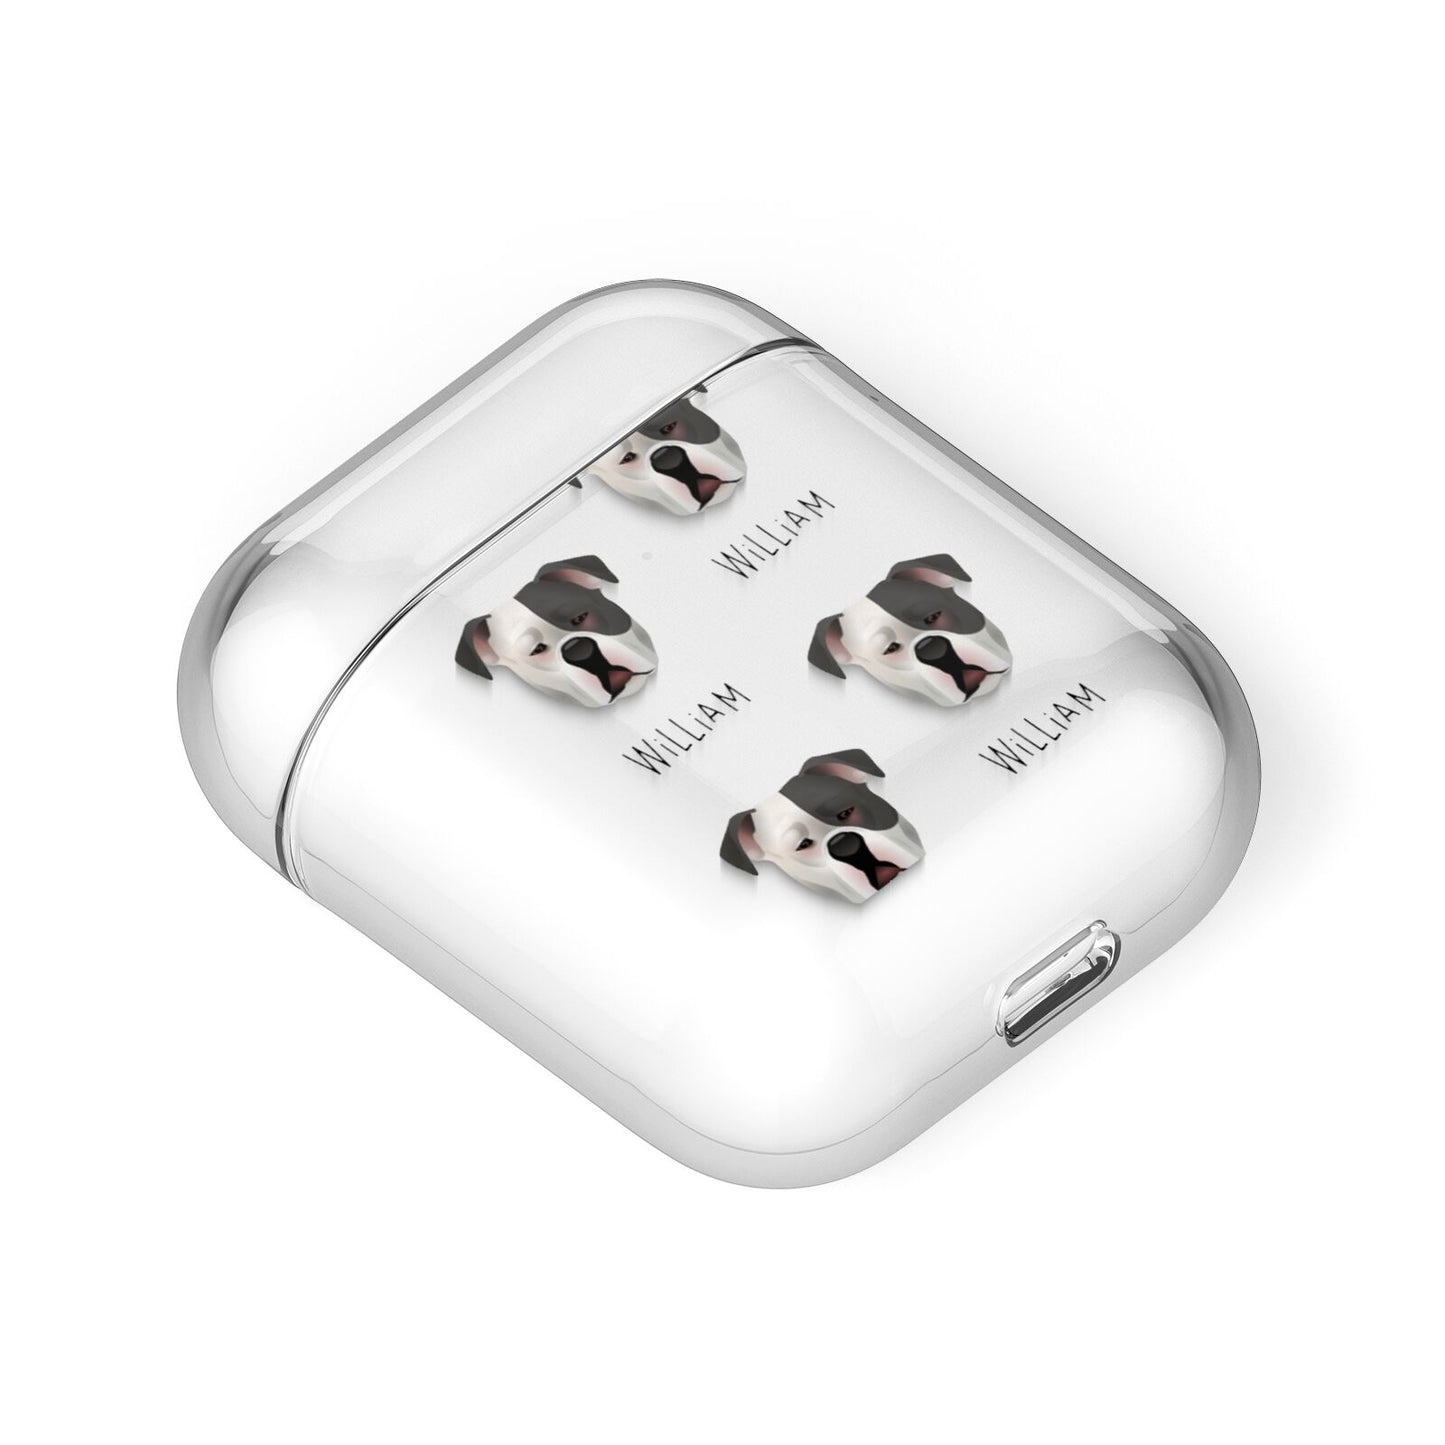 Johnson American Bulldog Icon with Name AirPods Case Laid Flat